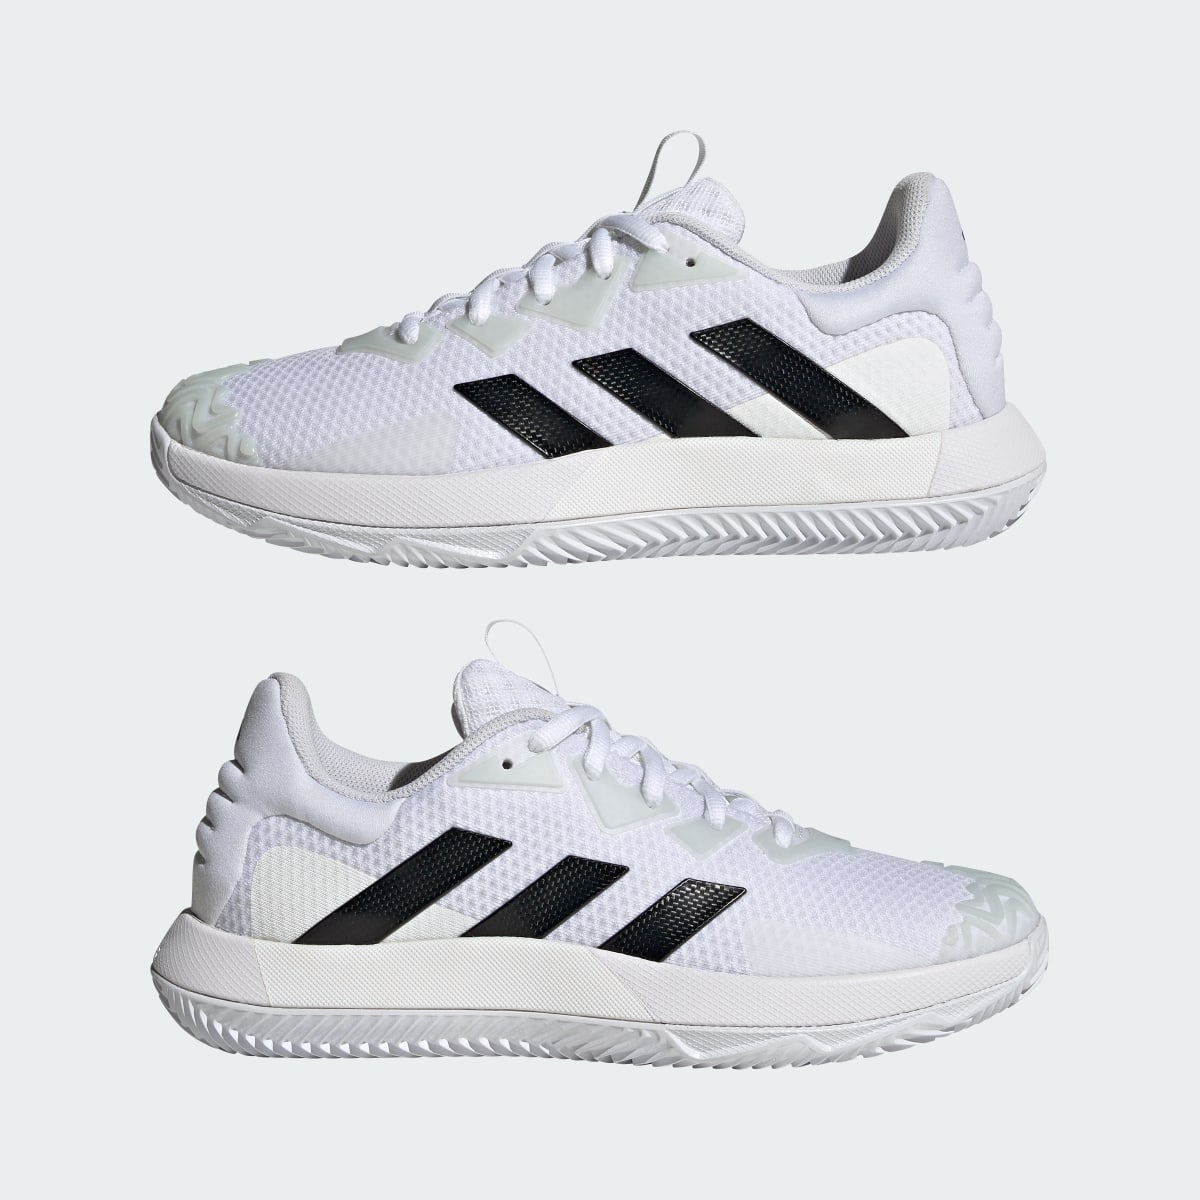 Adidas SoleMatch Control Clay Court Tennis Shoes. 8